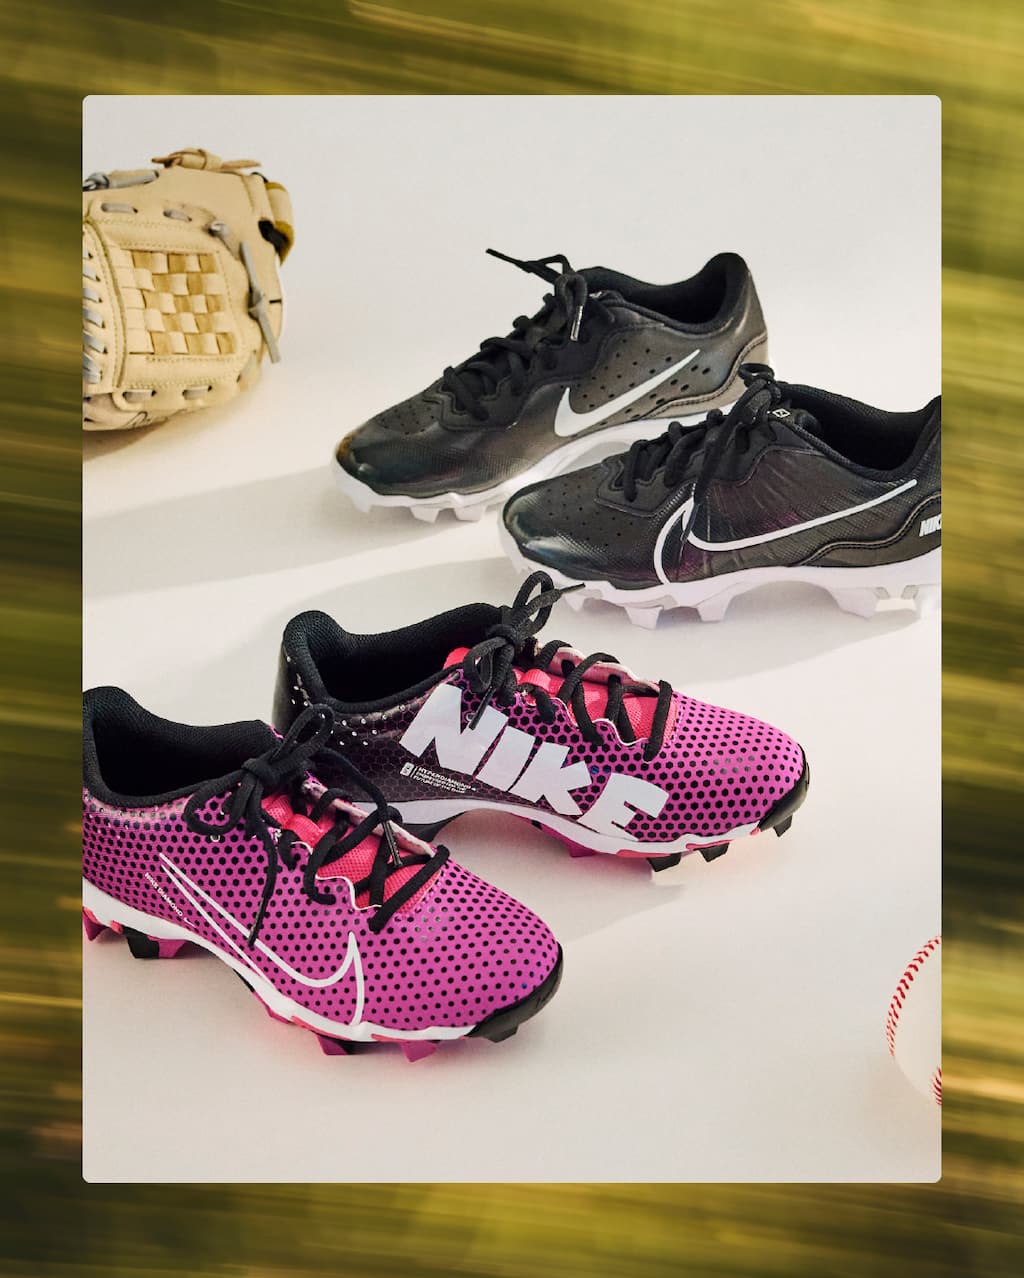 Featuring Nike cleats. Click to shop all Kids Nike Cleats at DSW Designer Shoe Warehouse.